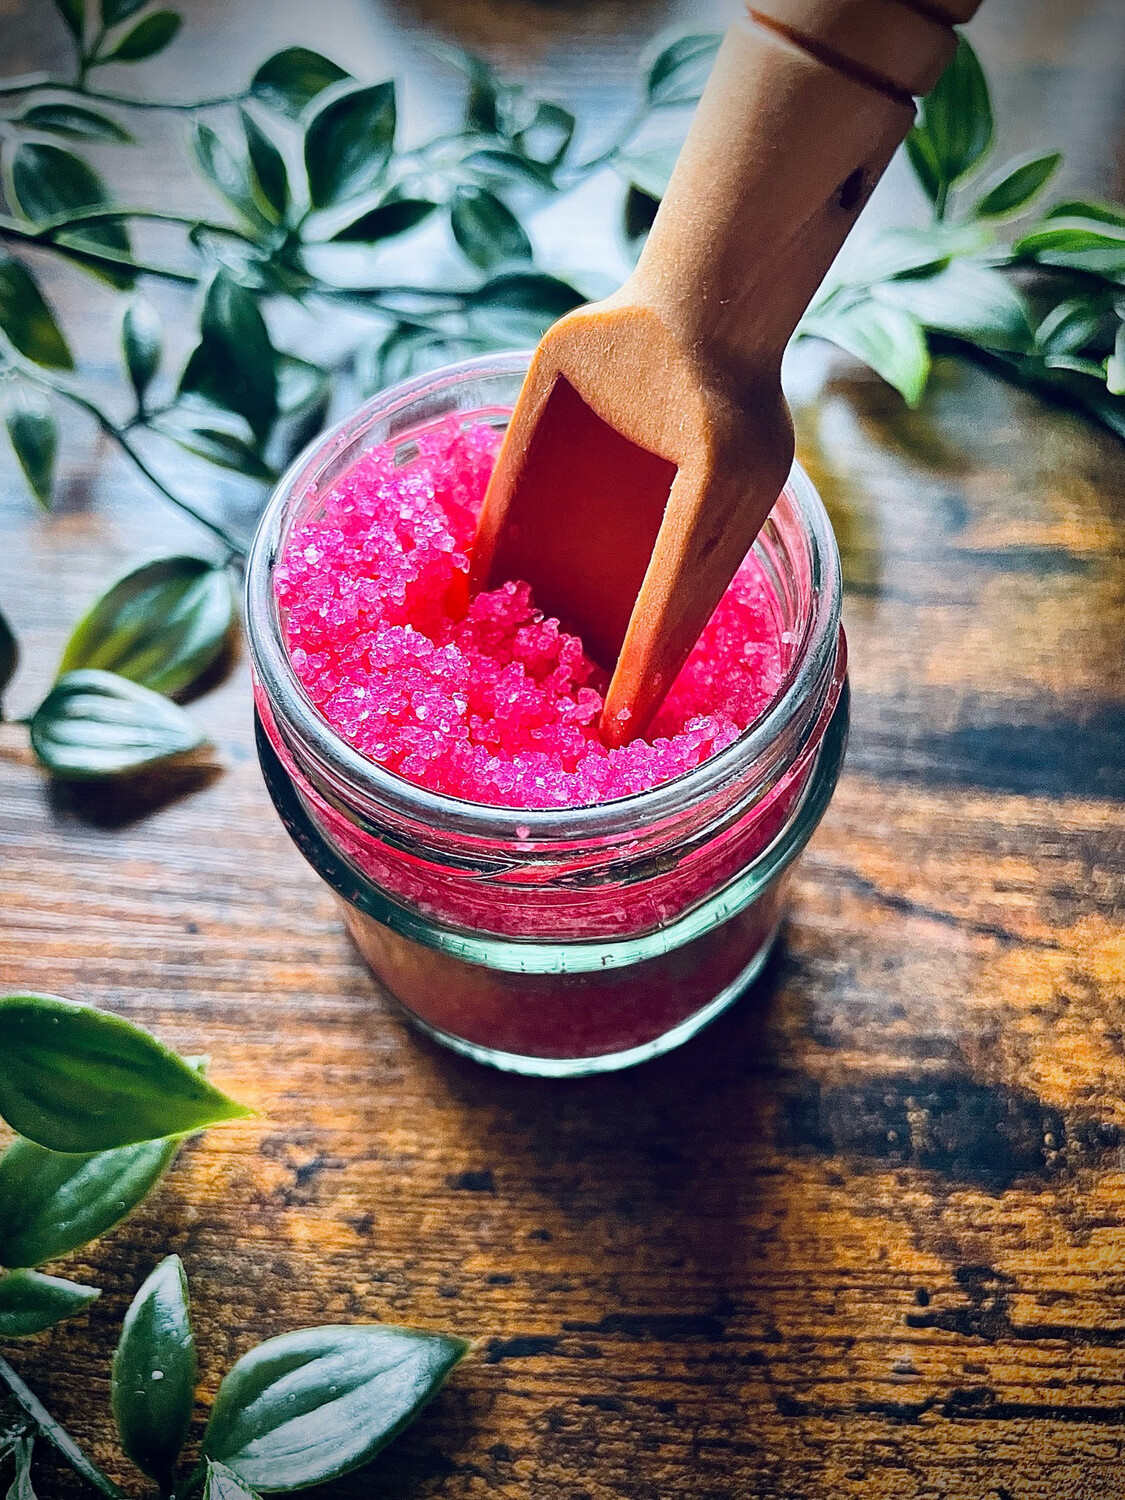 Scented Crystals - Candy Floss